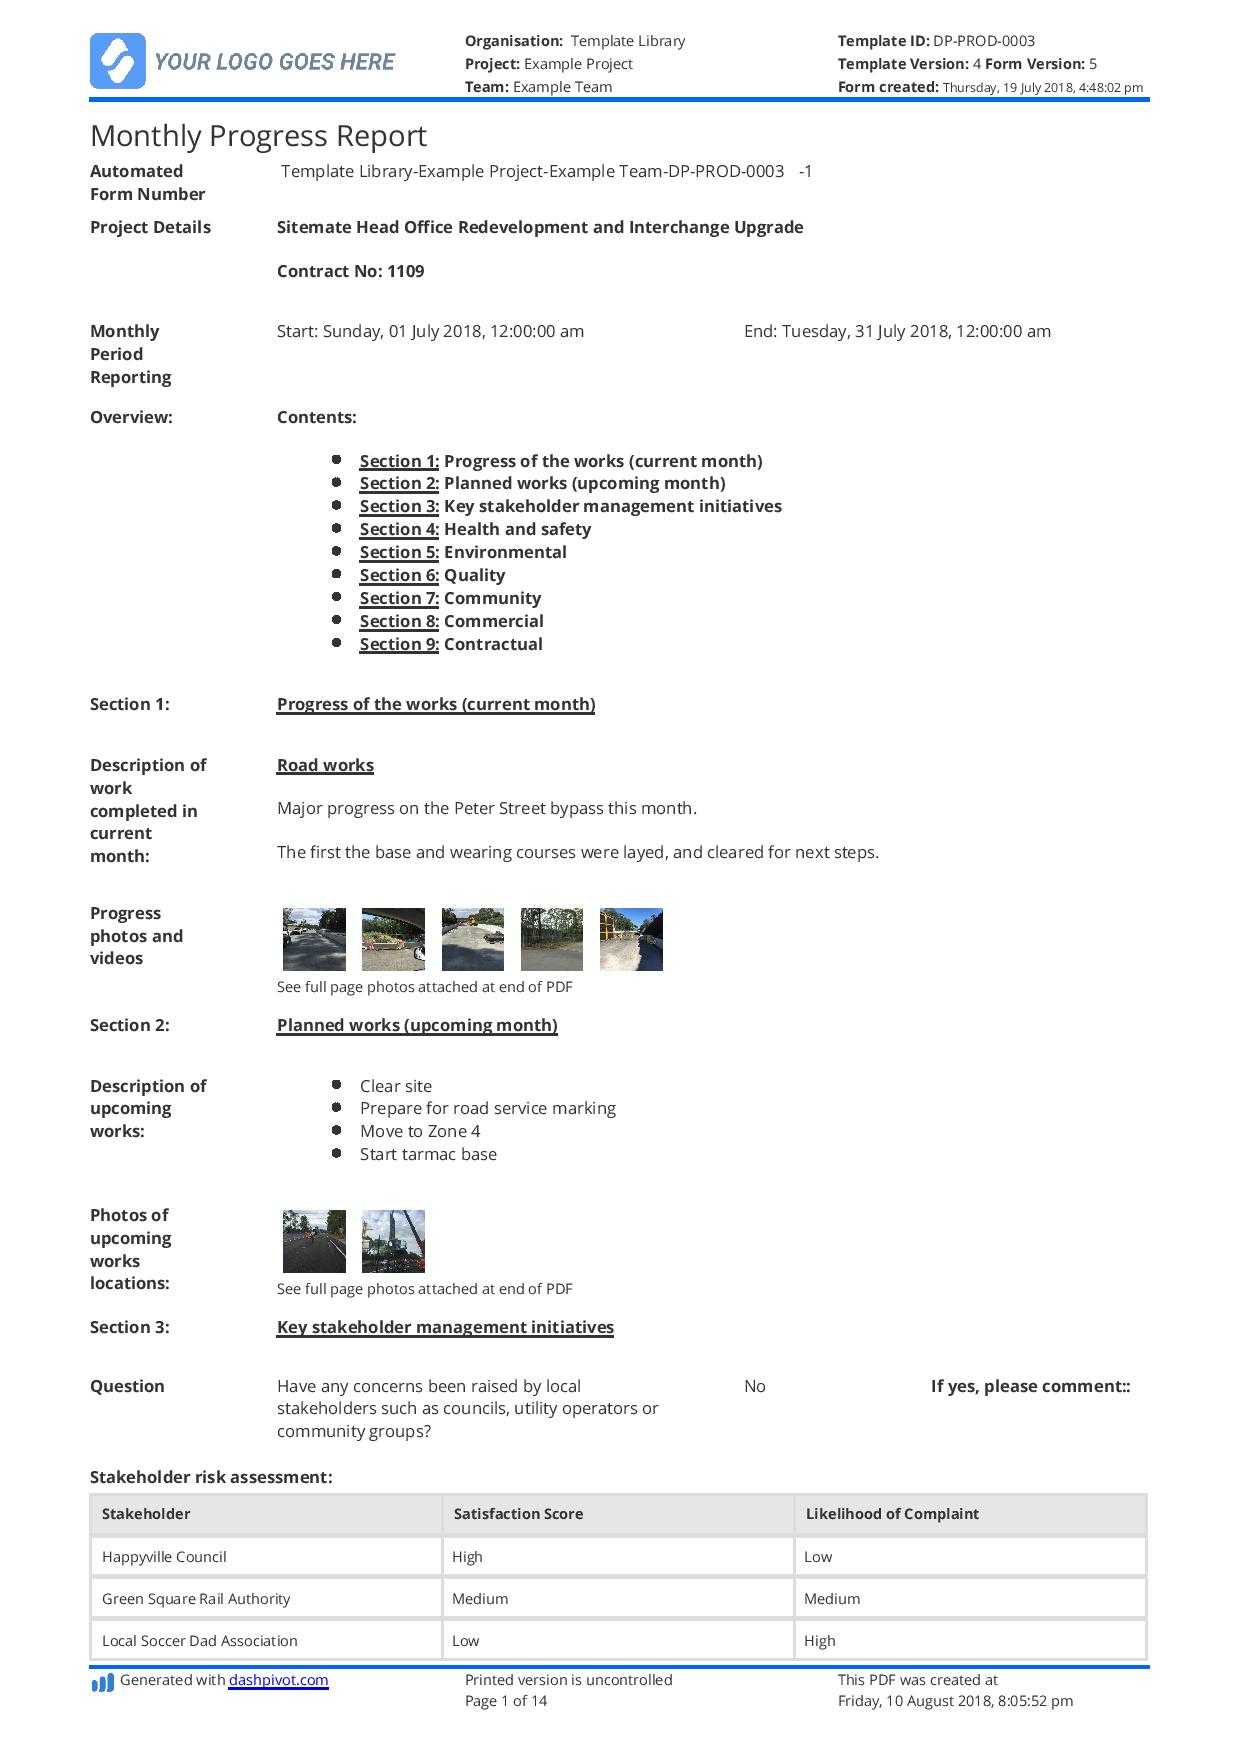 Monthly Construction Progress Report Template: Use This Pertaining To Site Progress Report Template